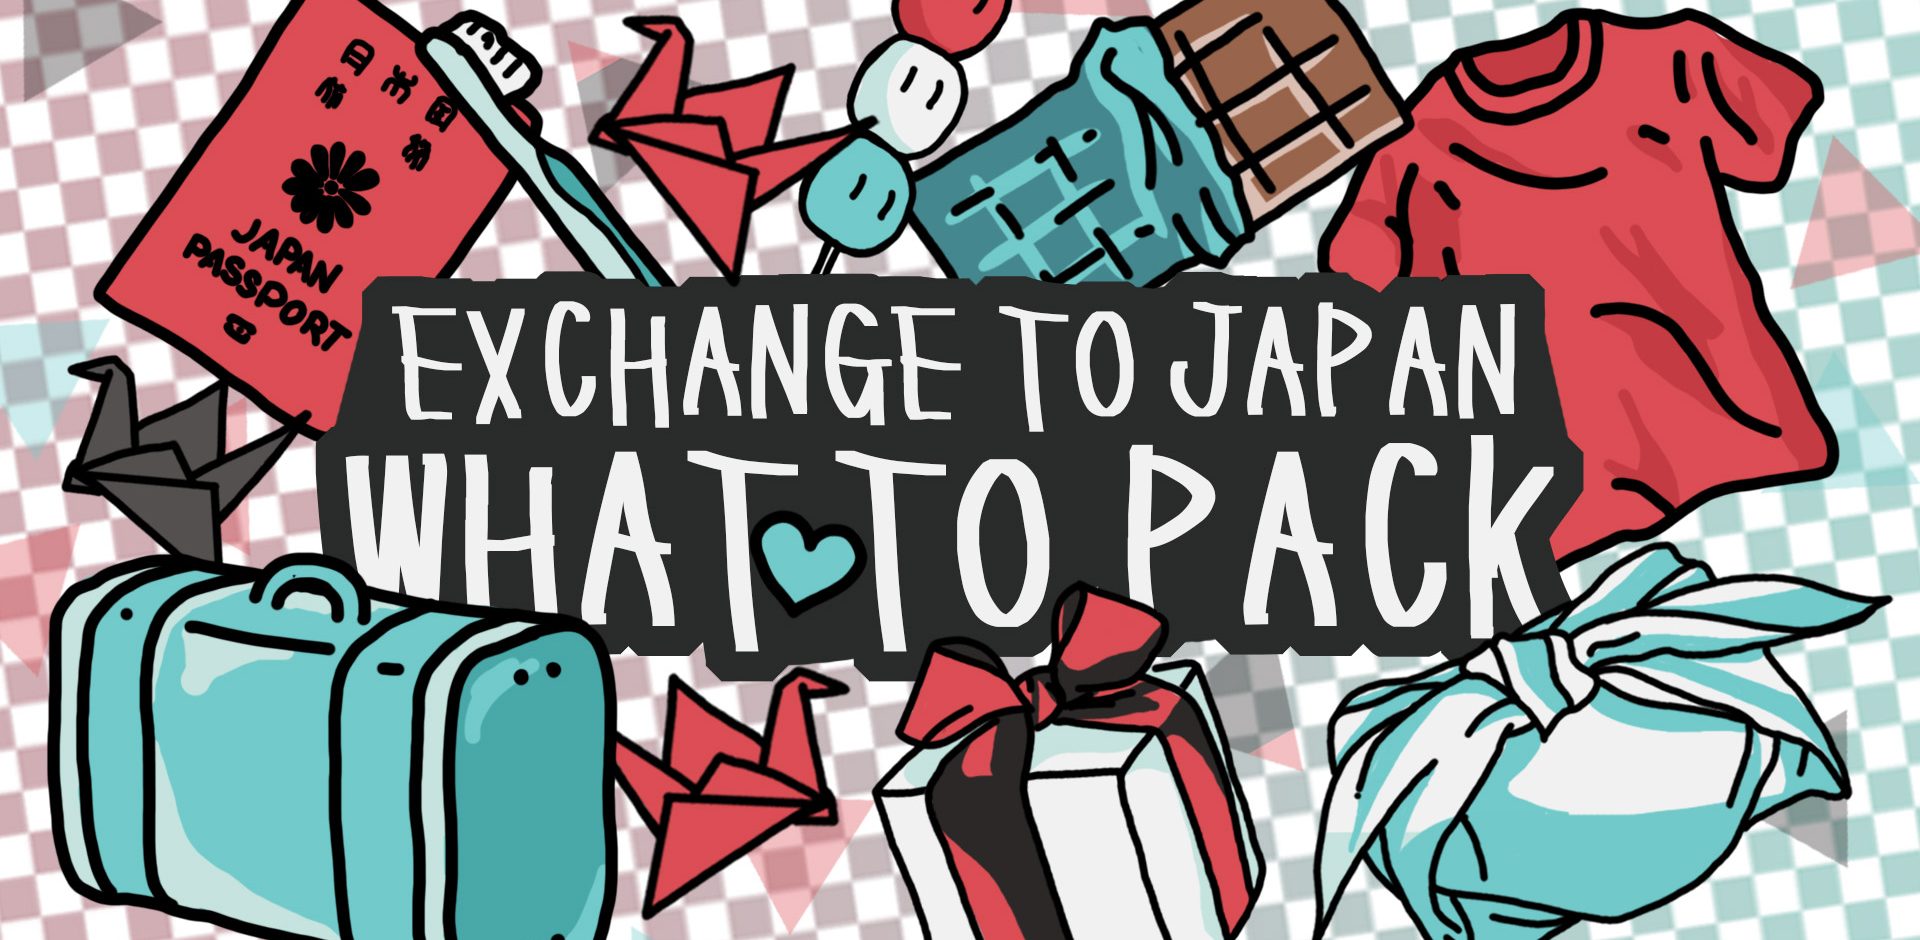 What to Pack – School Exchange to Japan